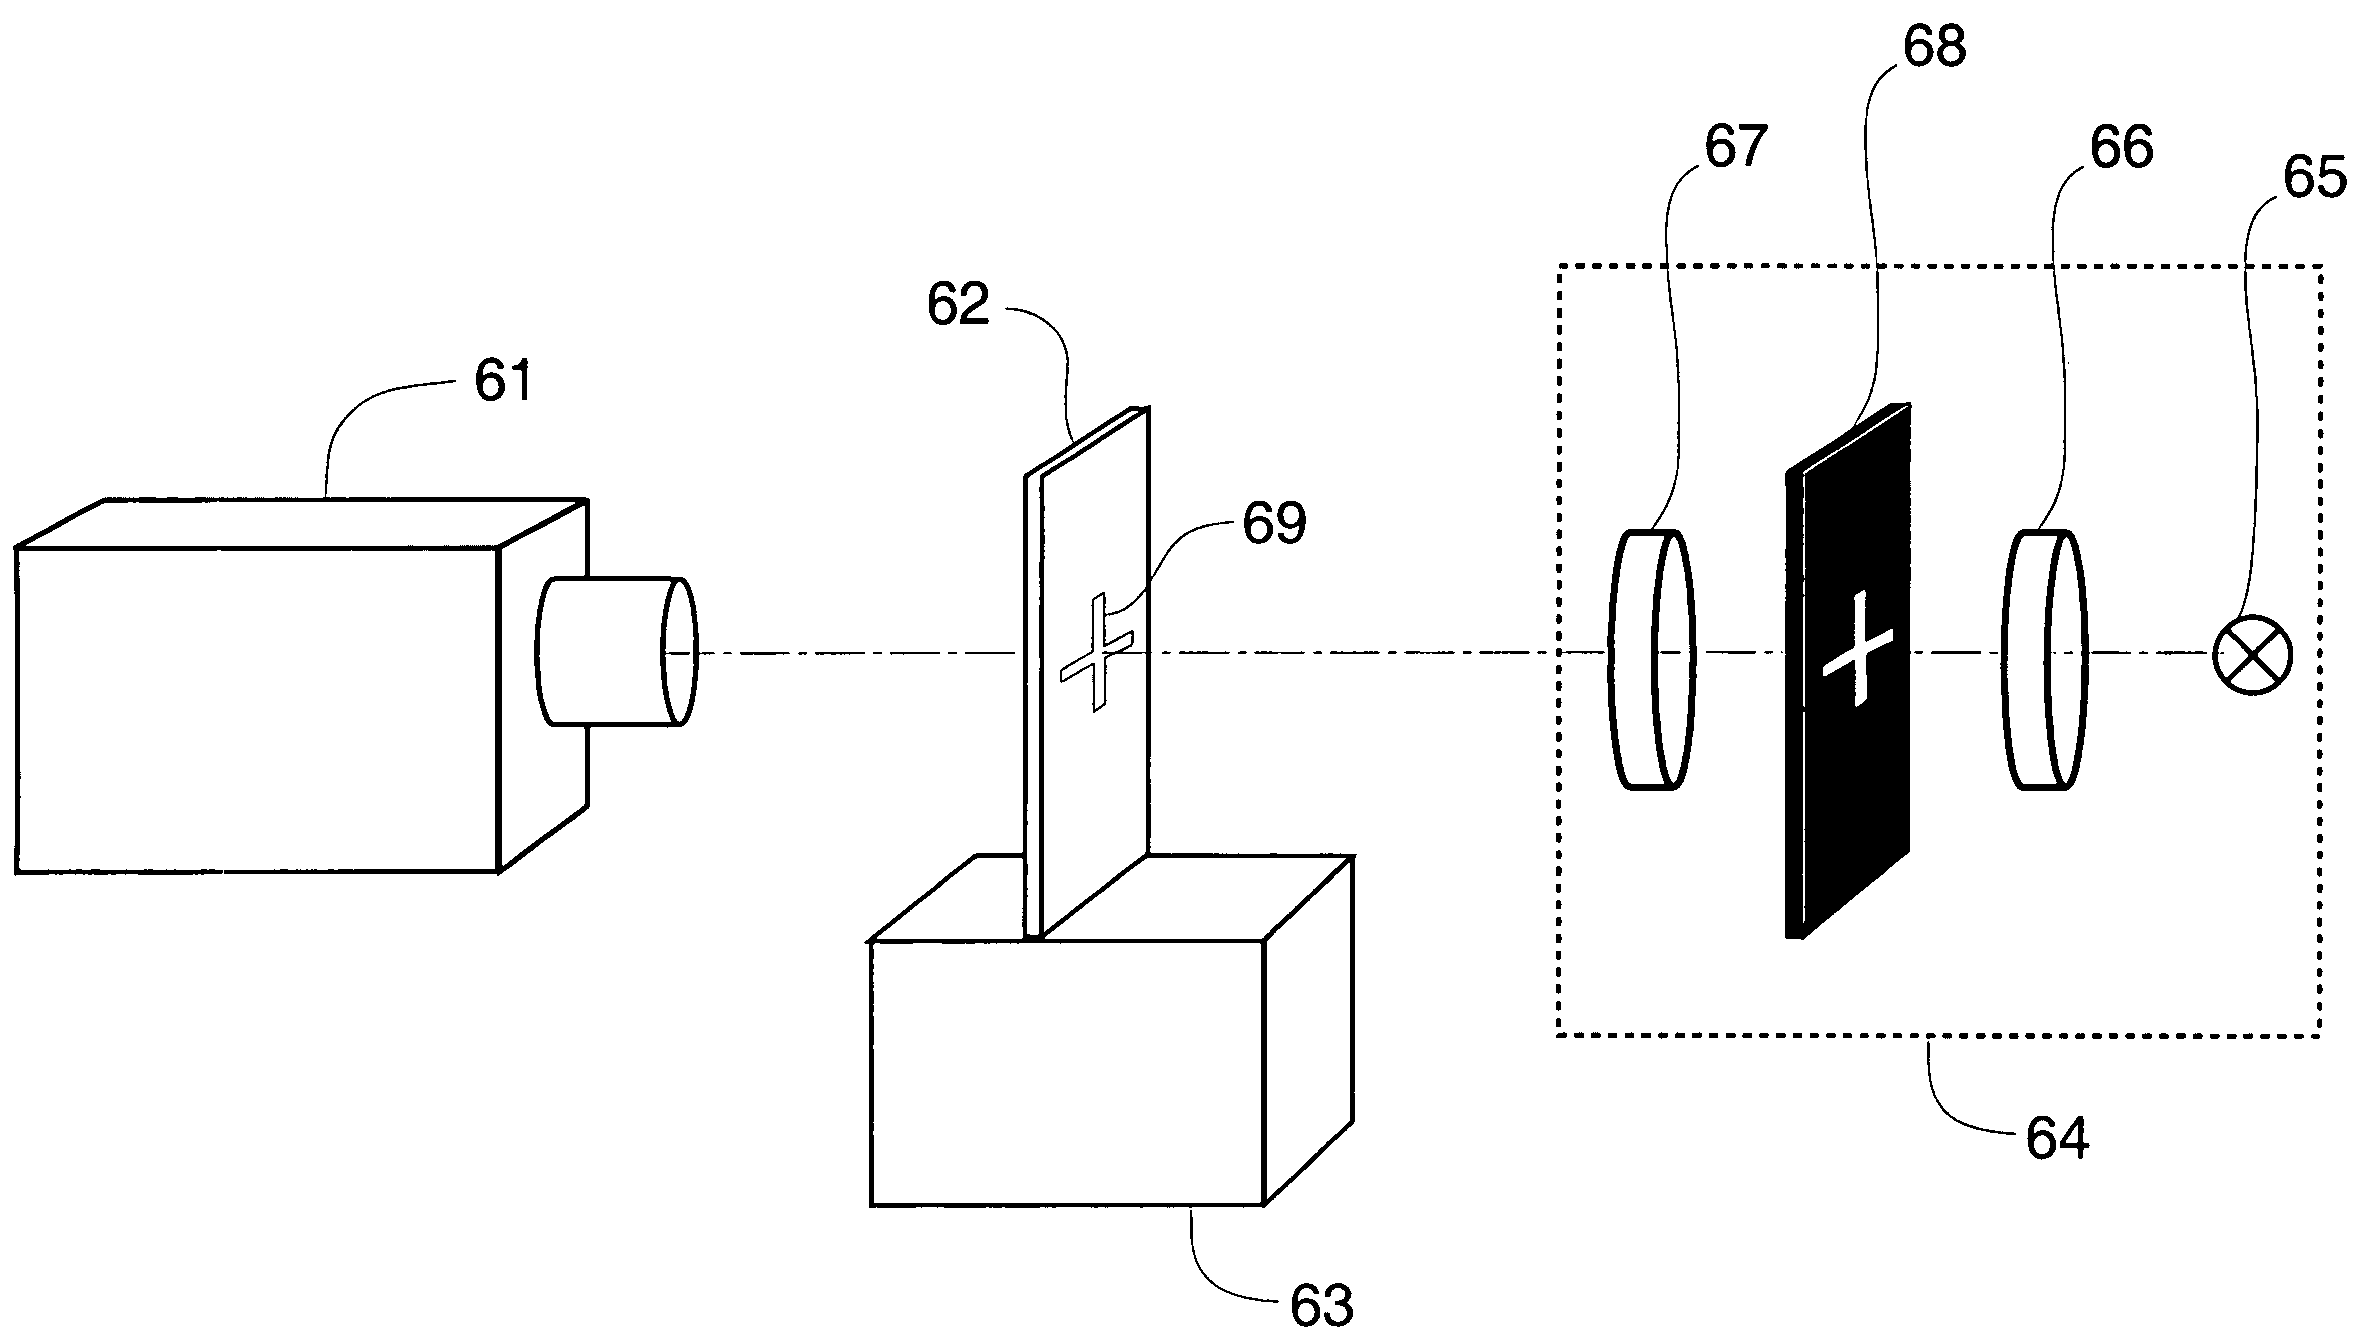 Semiconductor generation of dynamic infrared images